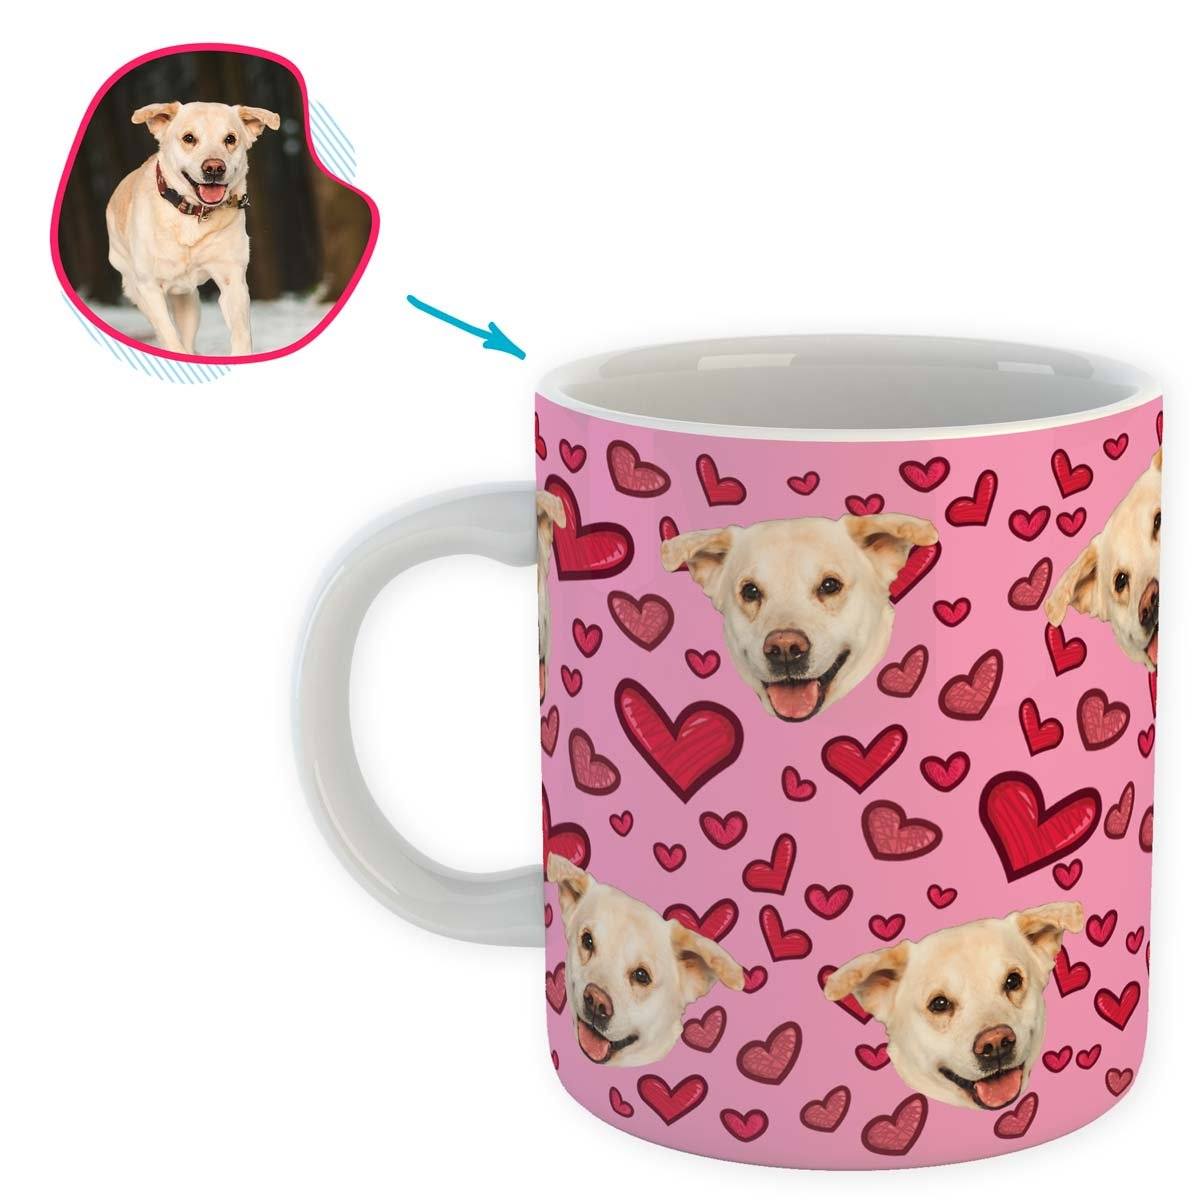 pink Heart mug personalized with photo of face printed on it